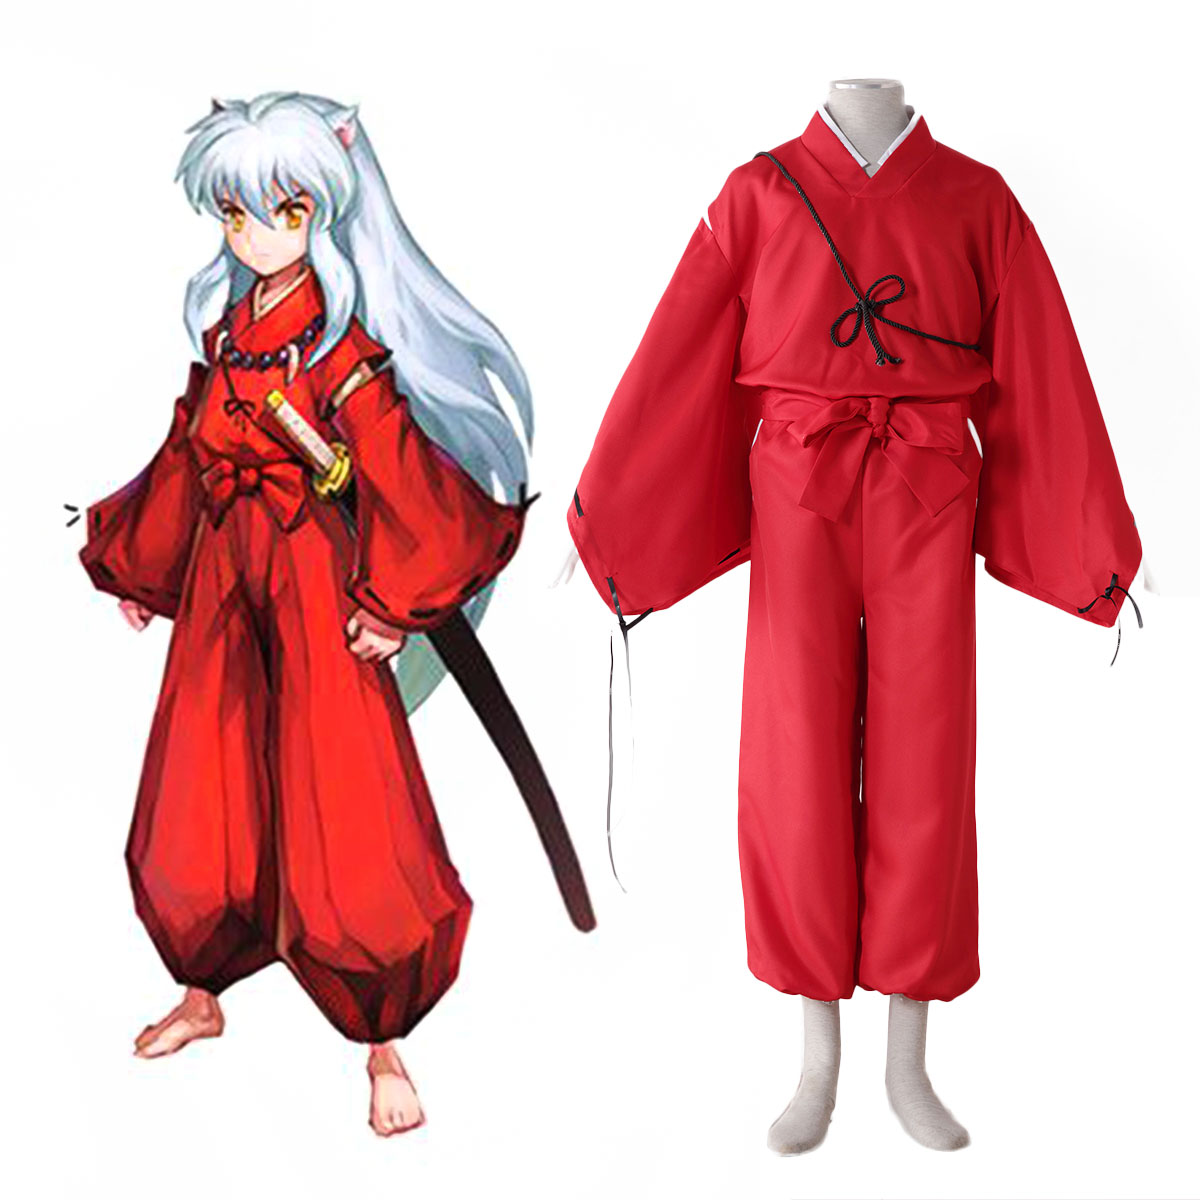 Inuyasha 2ND Red Cosplay Costumes Deluxe Edition [E87]